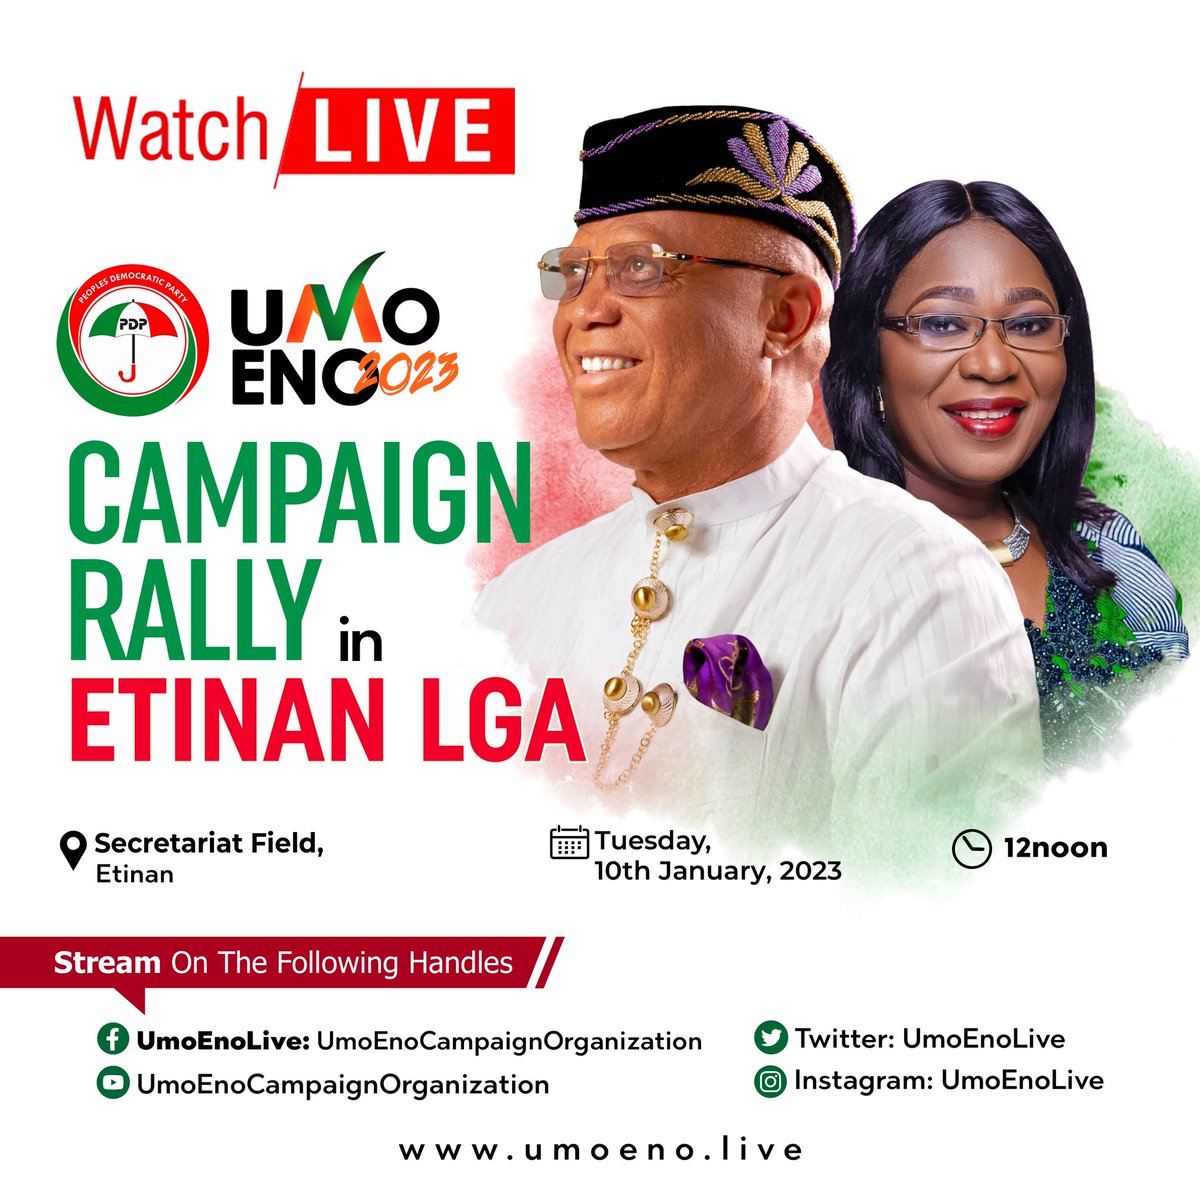 PDP governorship campaign train berths in Etinan LGA, today. 

Subscribe to our YouTube Channels to watch more exciting campaign videos.

Youtube: youtube.com/@umoenocampaig…

Facebook: facebook.com/umoenocampaign… 

Watch Live @ umoeno.live
#UmoEnoLive #AkwaIbomIsPDP #VotePDP